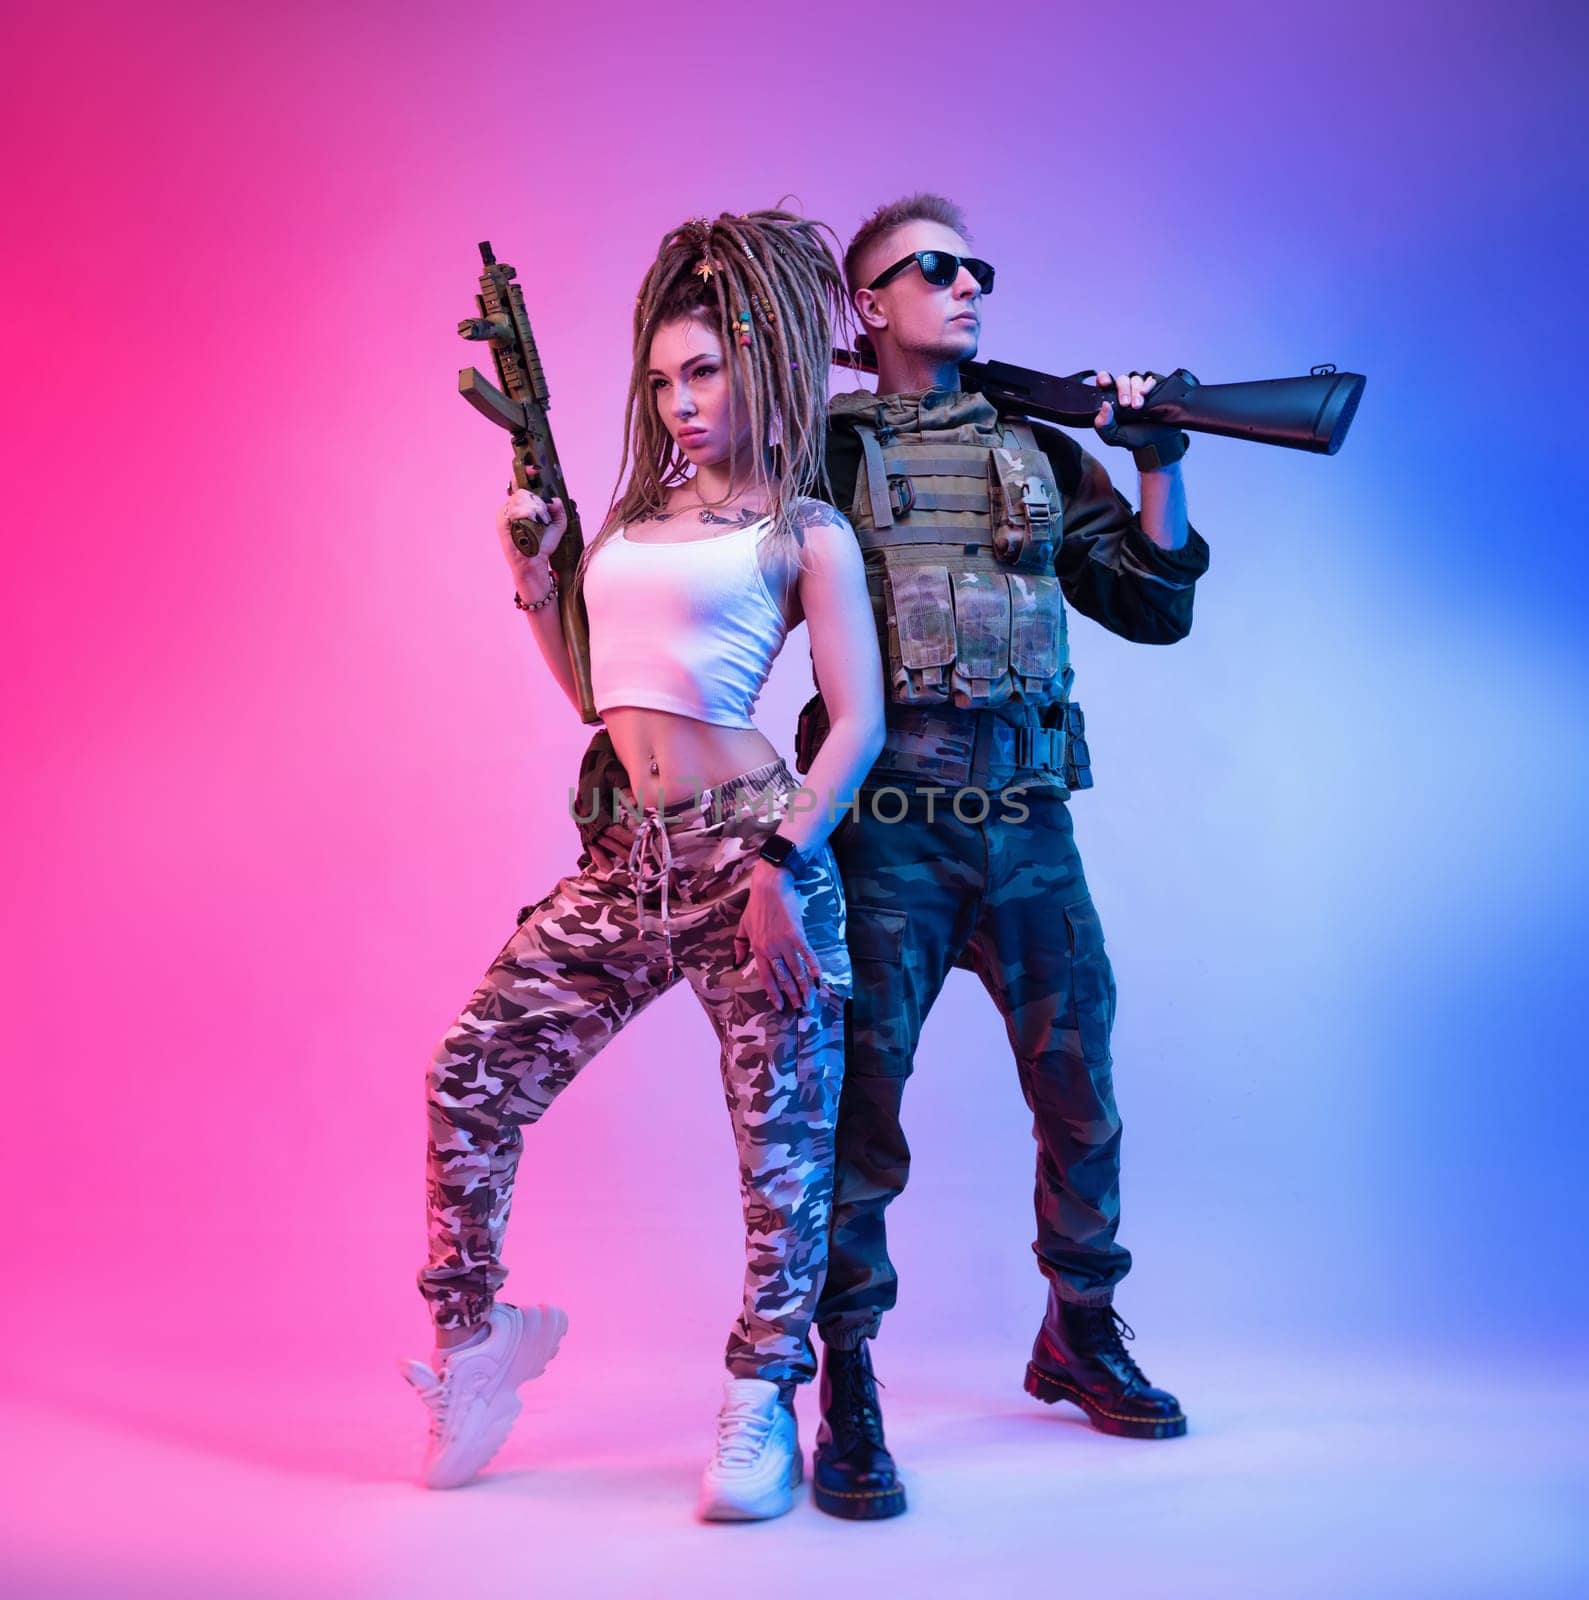 daring stylish girl with an automatic rifle and a guy in military clothes with an airsoft gun in neon light on a bright neon background pose fashionably by Rotozey